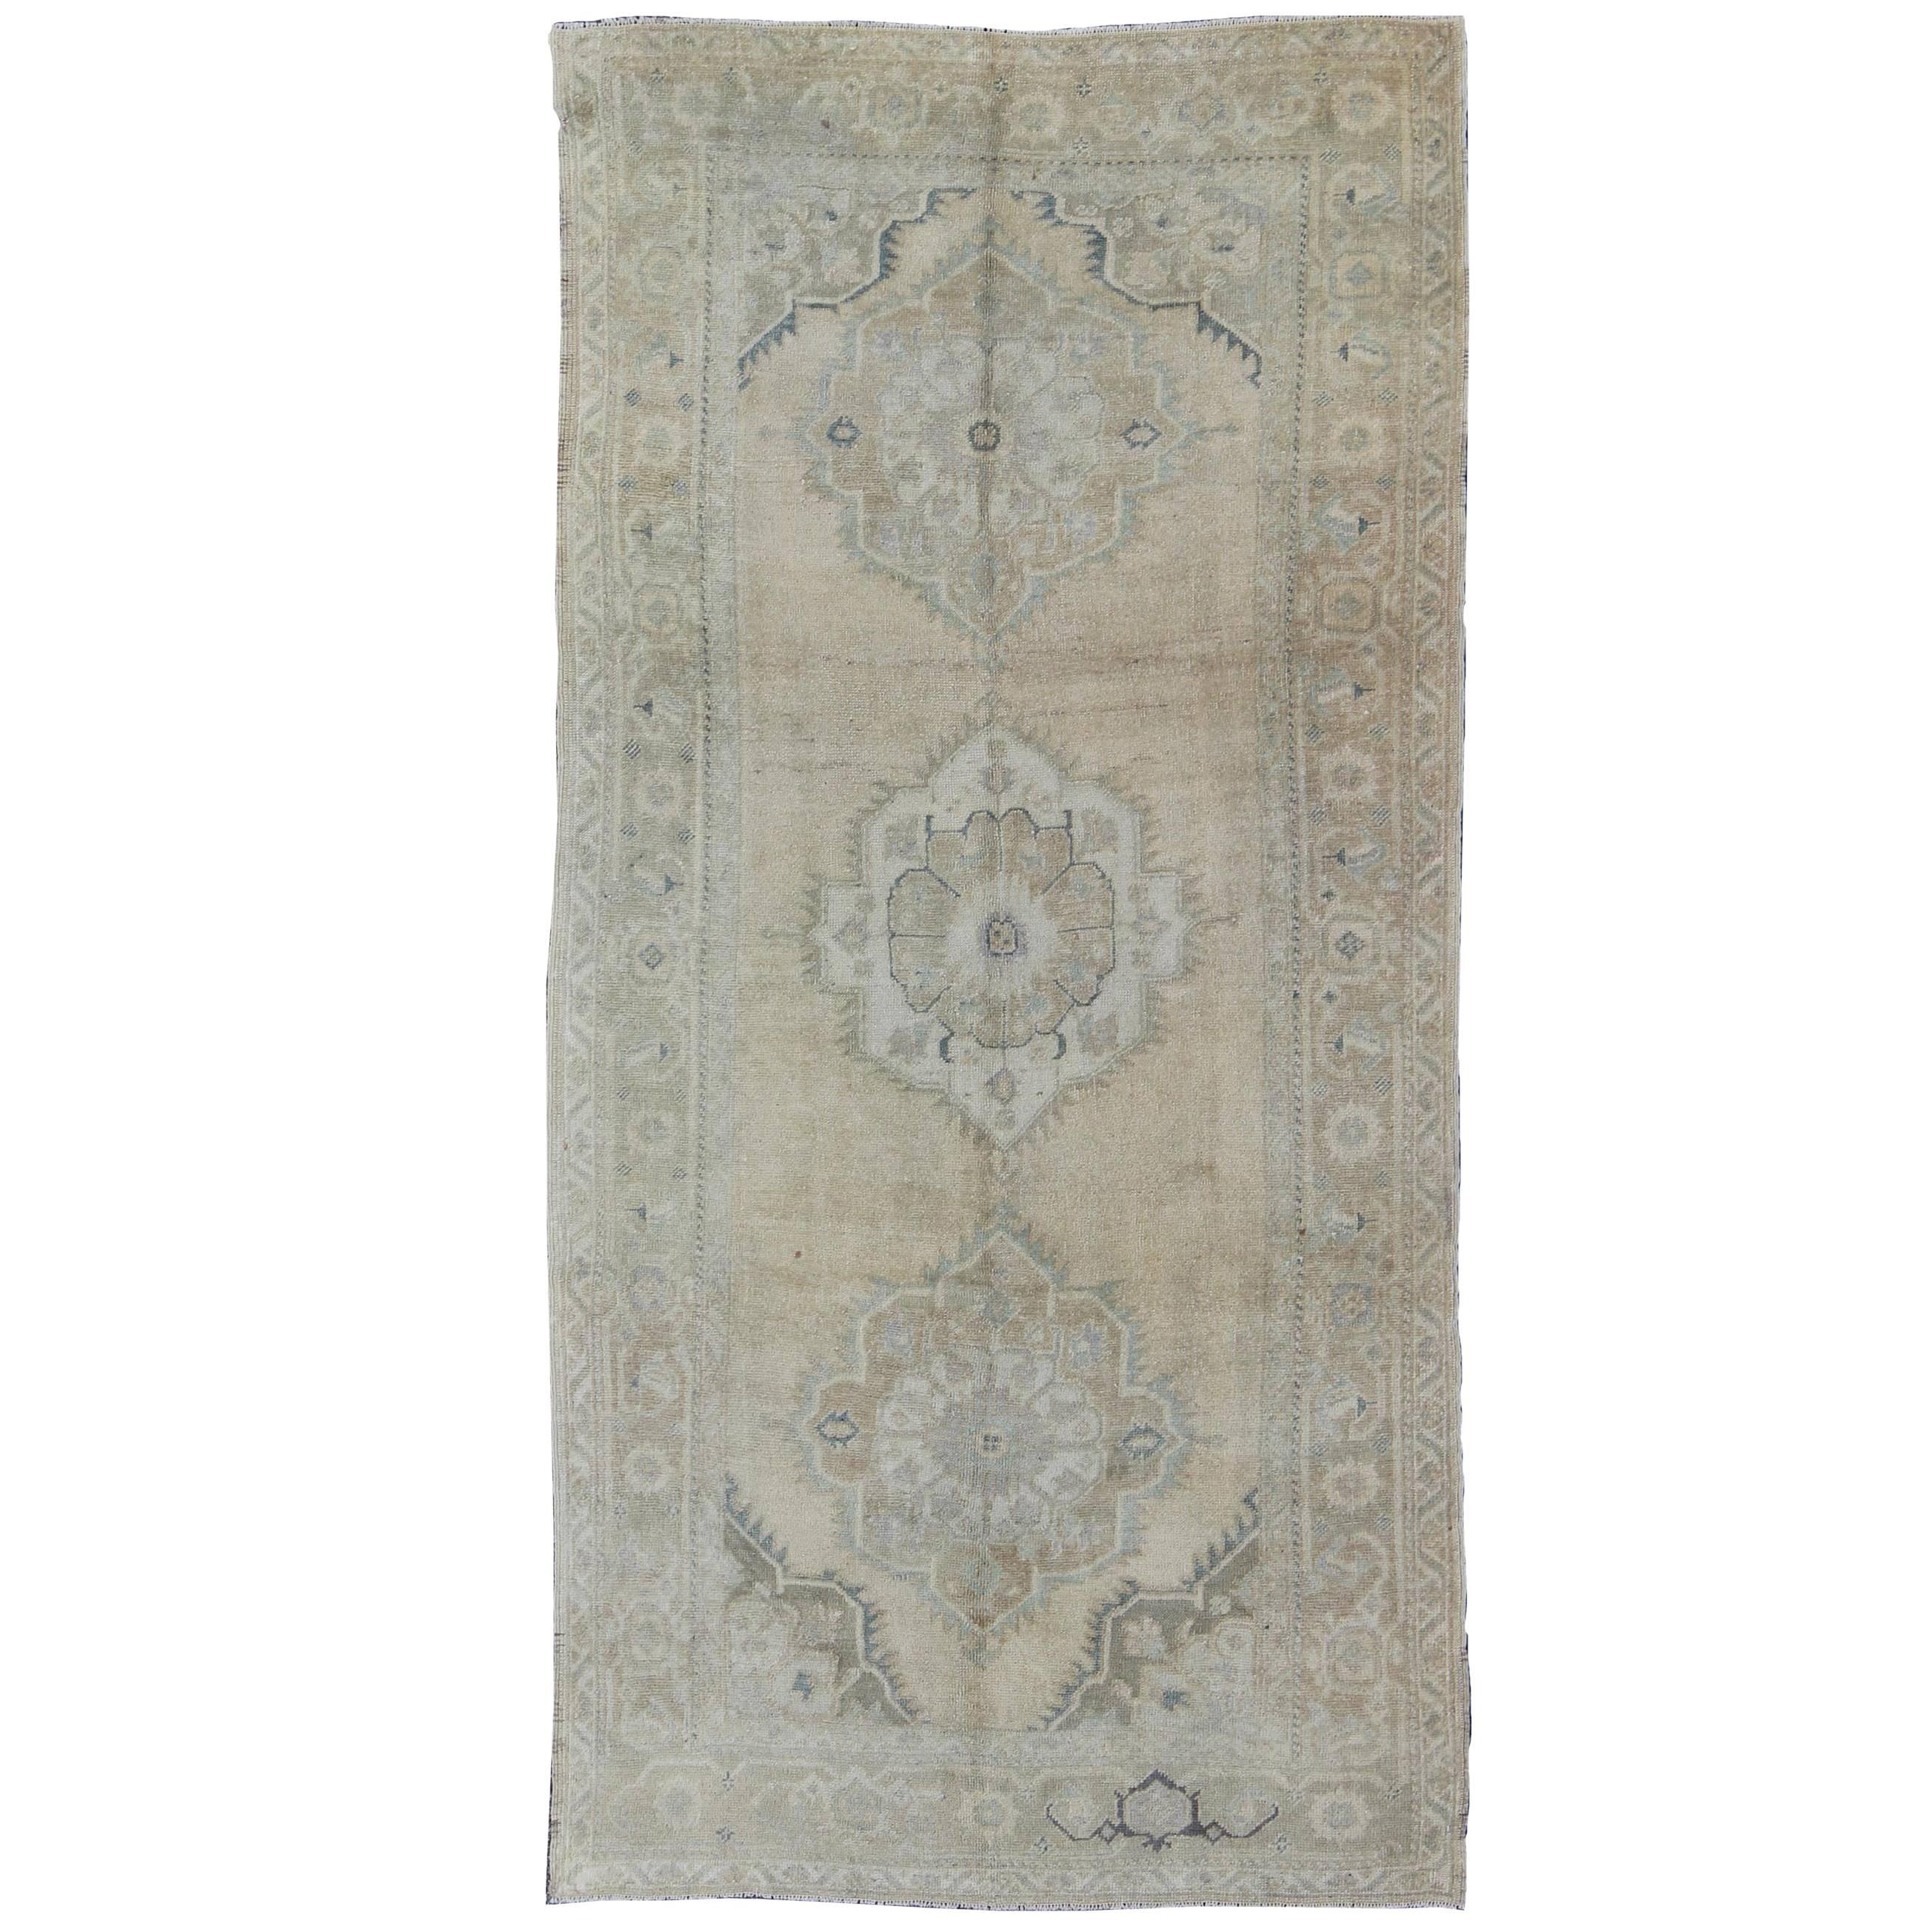 Vintage Turkish Oushak Rug with Three Central Medallions in Taupe and Light Blue